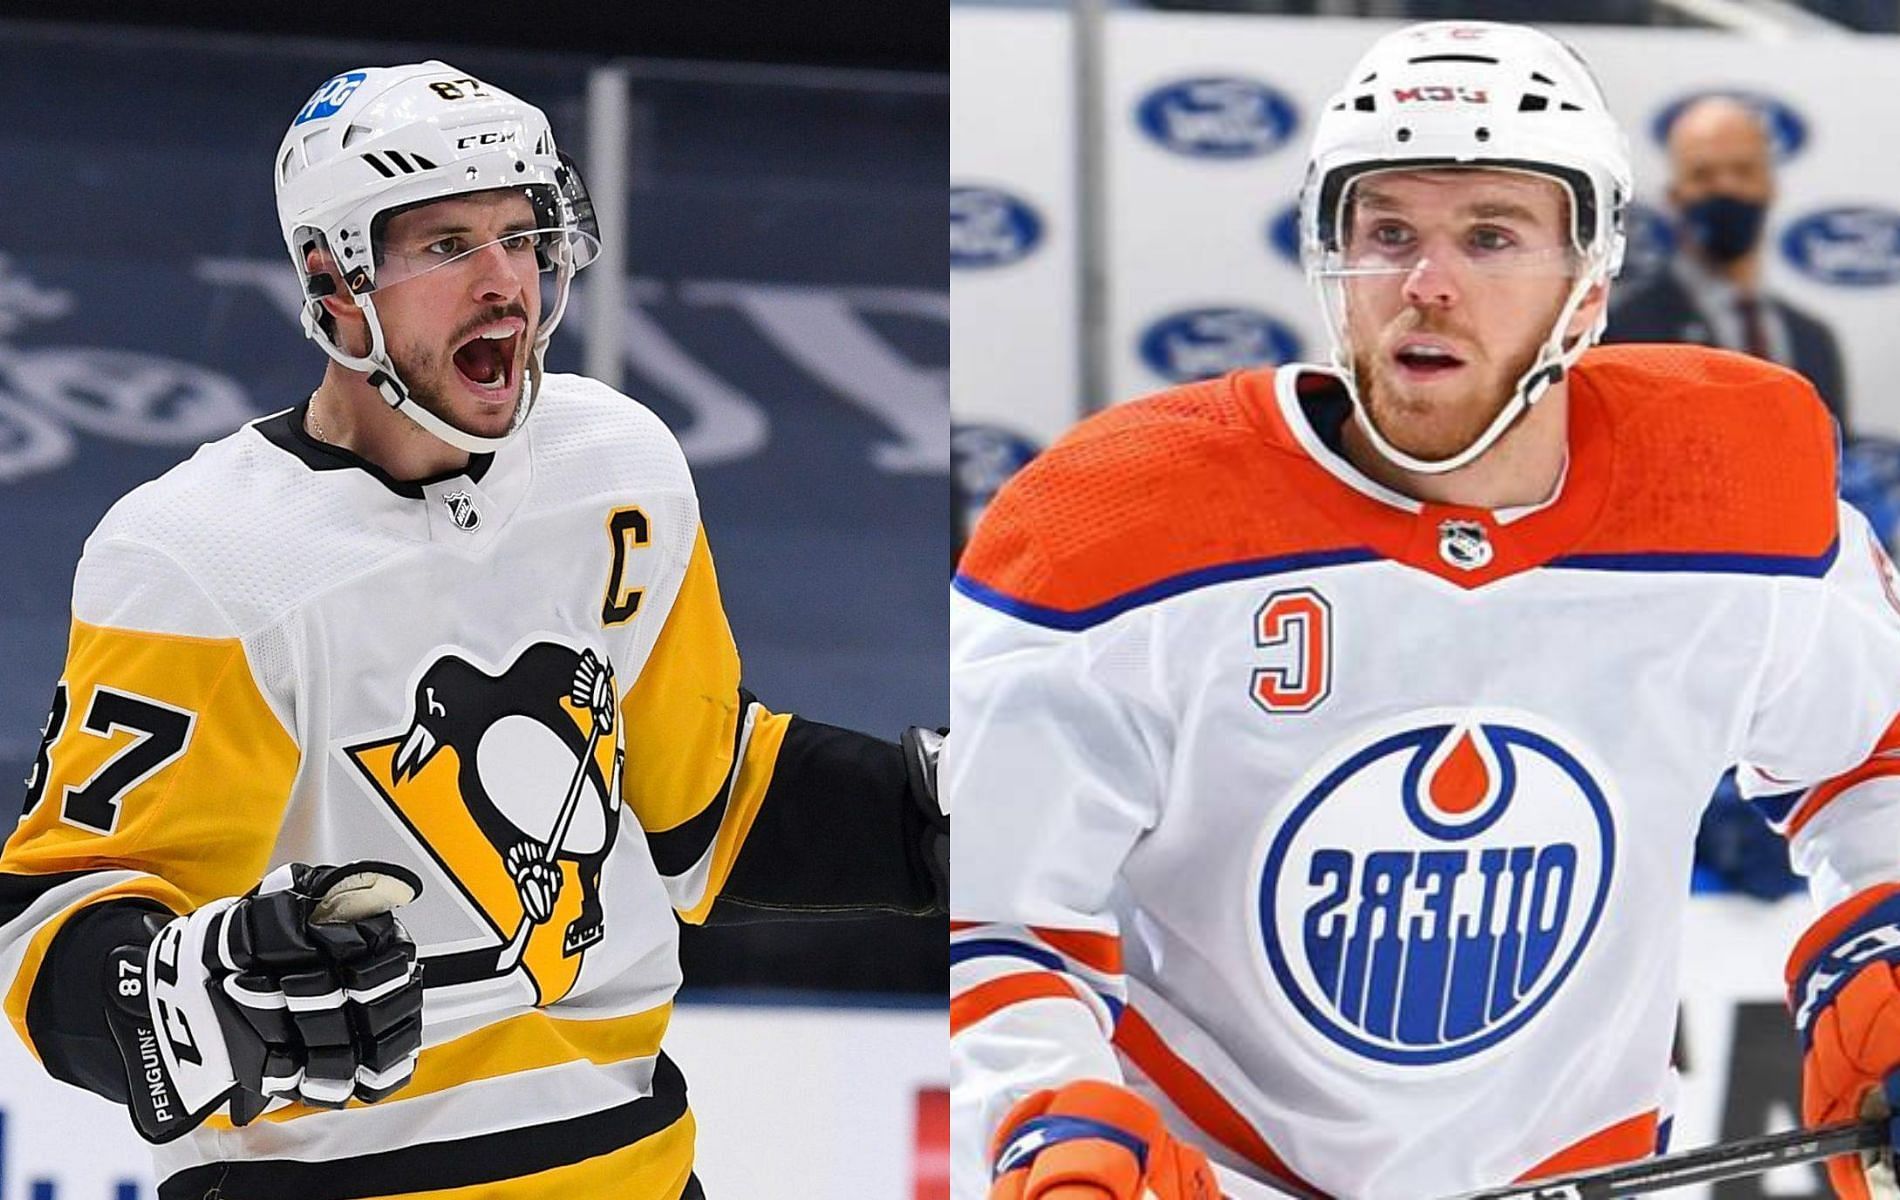 Sidney Crosby sets high expectations for Connor McDavid